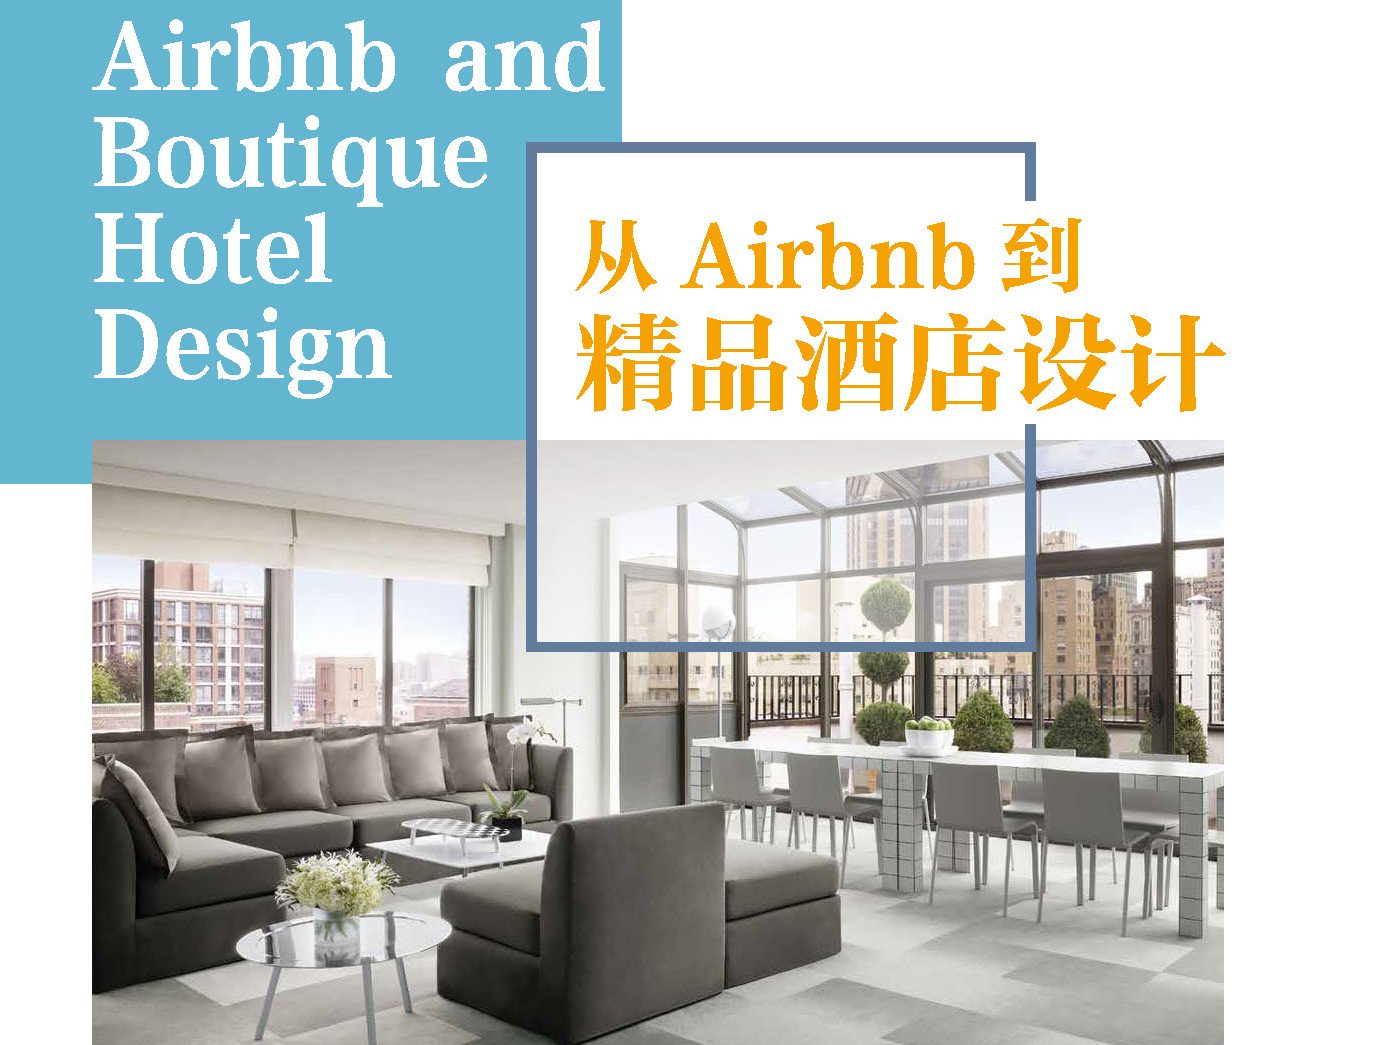 Airbnb and Boutique Hotel Design